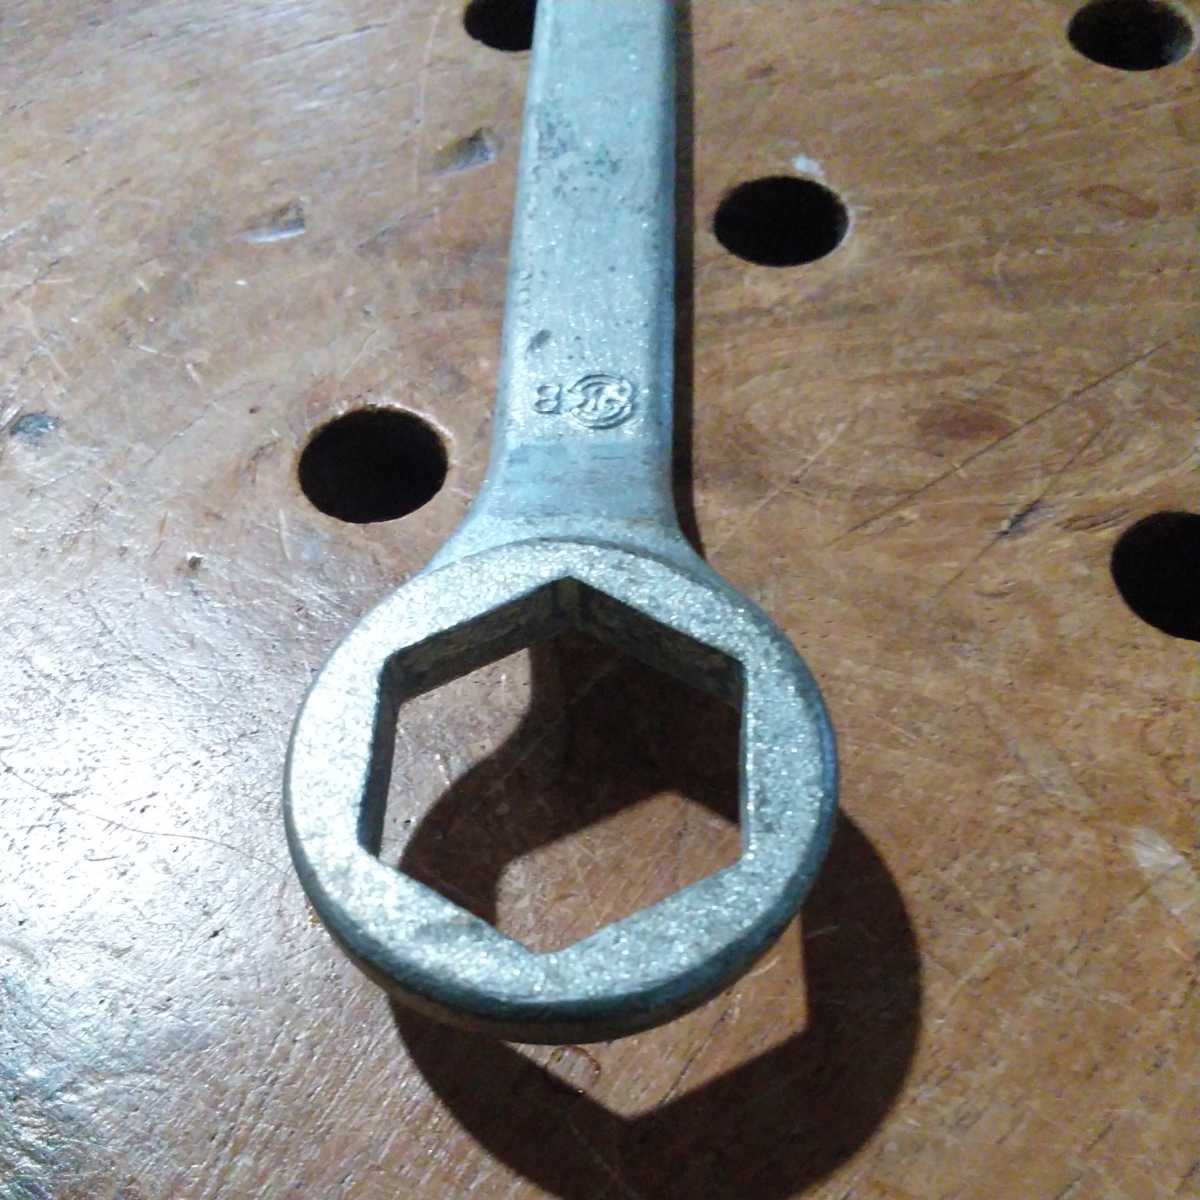  Honda loaded tool maintenance for tool glasses wrench size 23mm. old Logo HM HONDA total length 133.4mm approximately 9.6mm. offset back surface - RK B very popular!